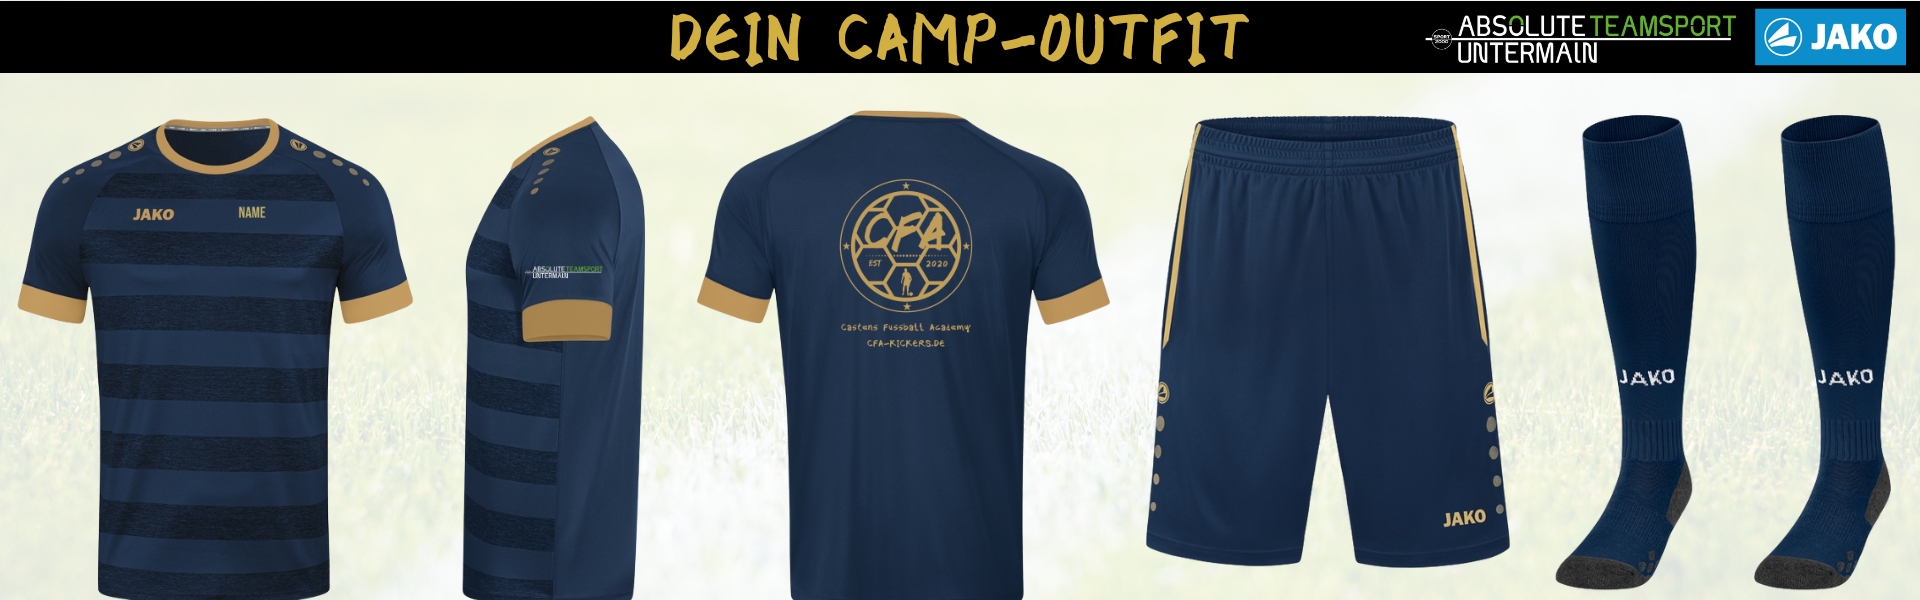 CFA-Kickers-Dein-Camp-Outfit